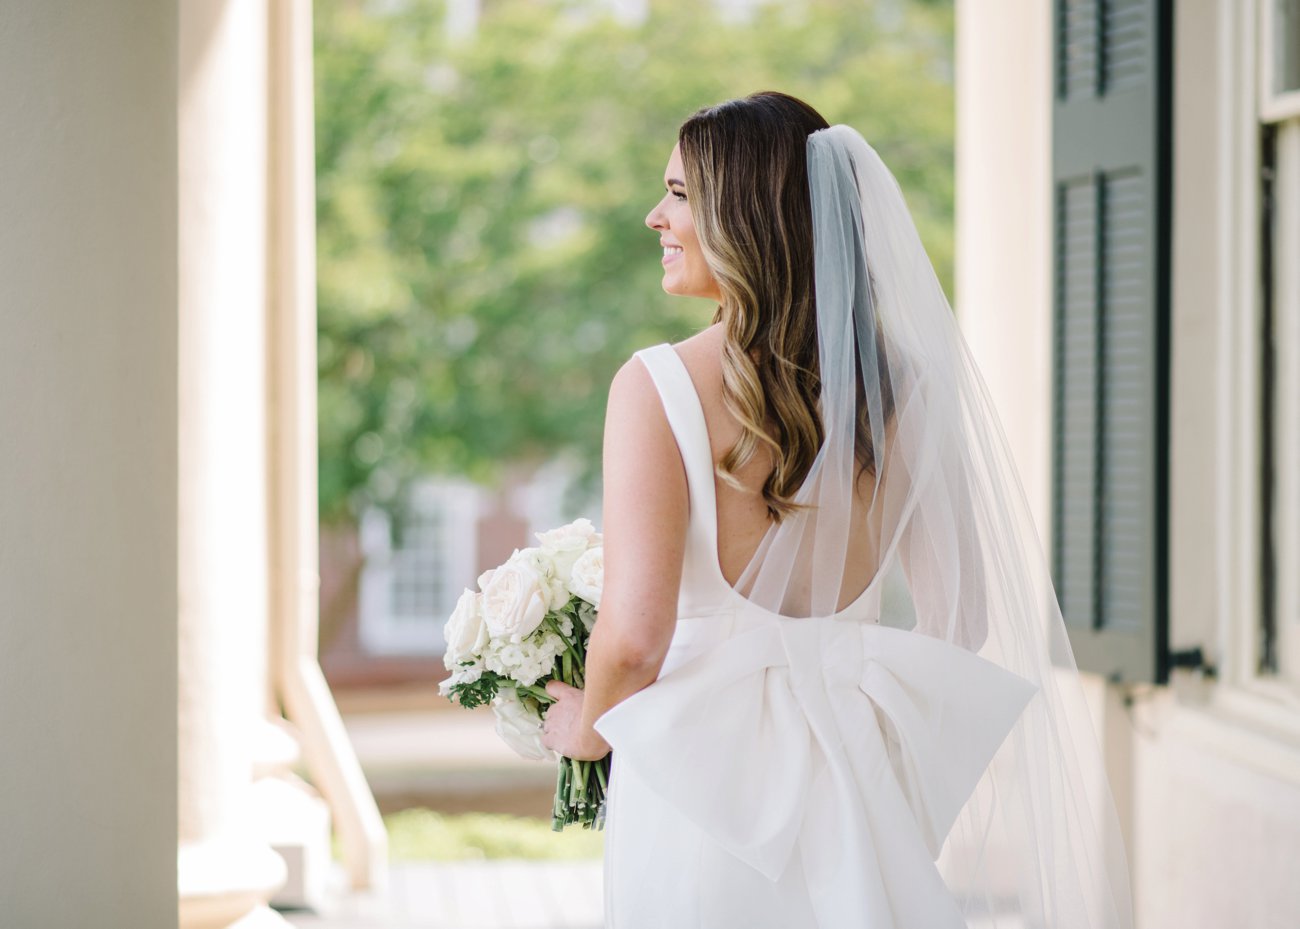 Southern bride in veil with large bow on dress